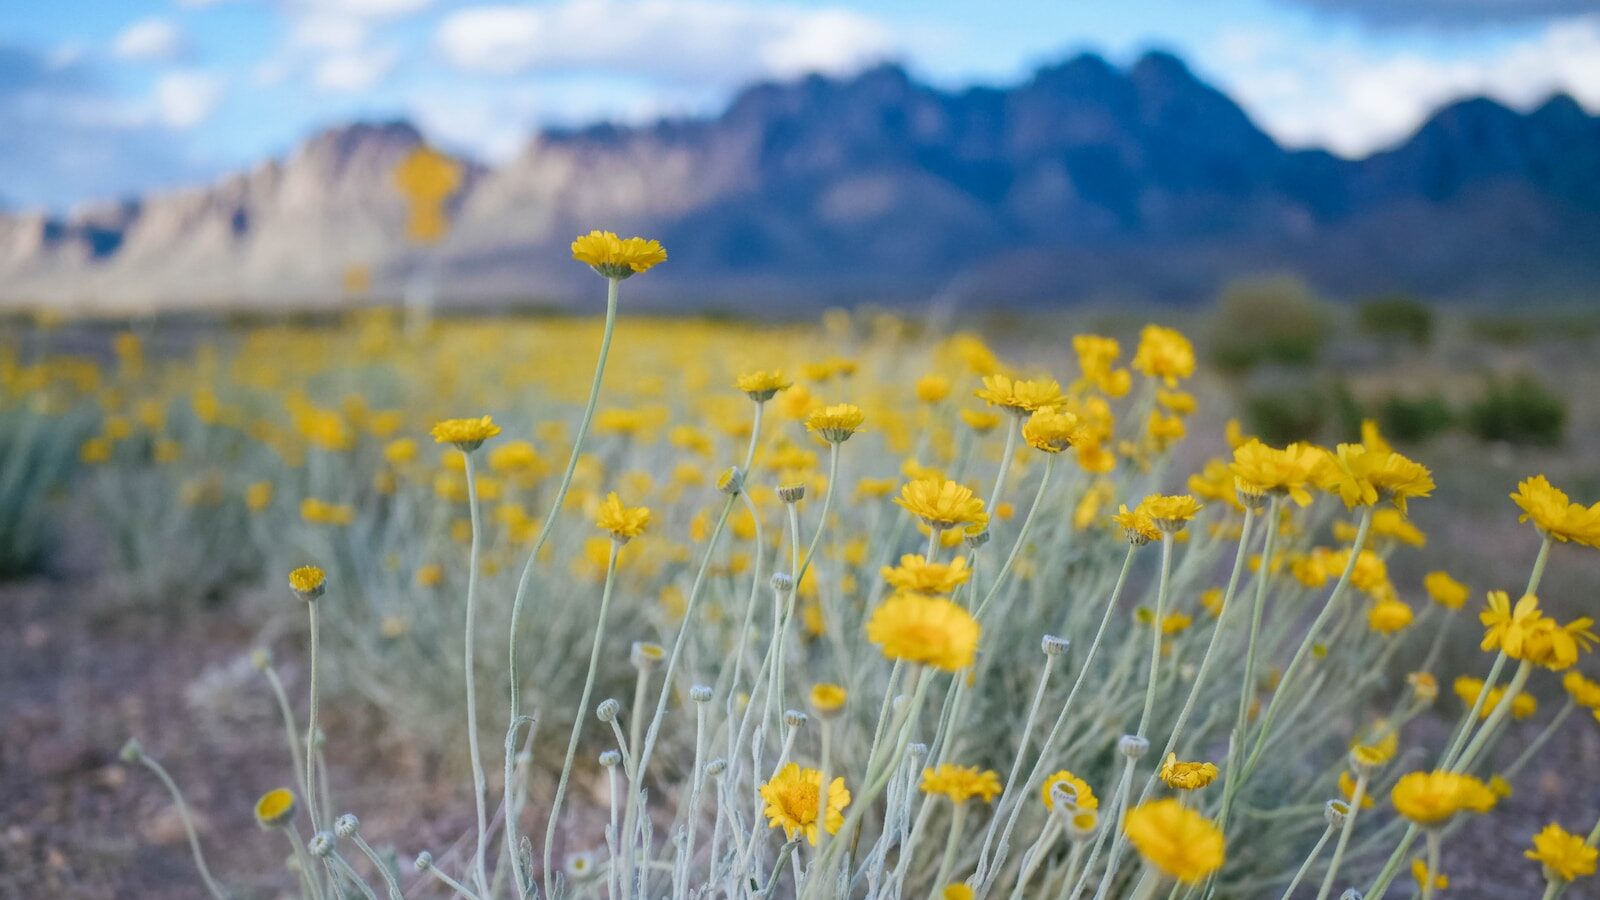 Desert Marigolds blooming at the foot of the Organ Mountains.